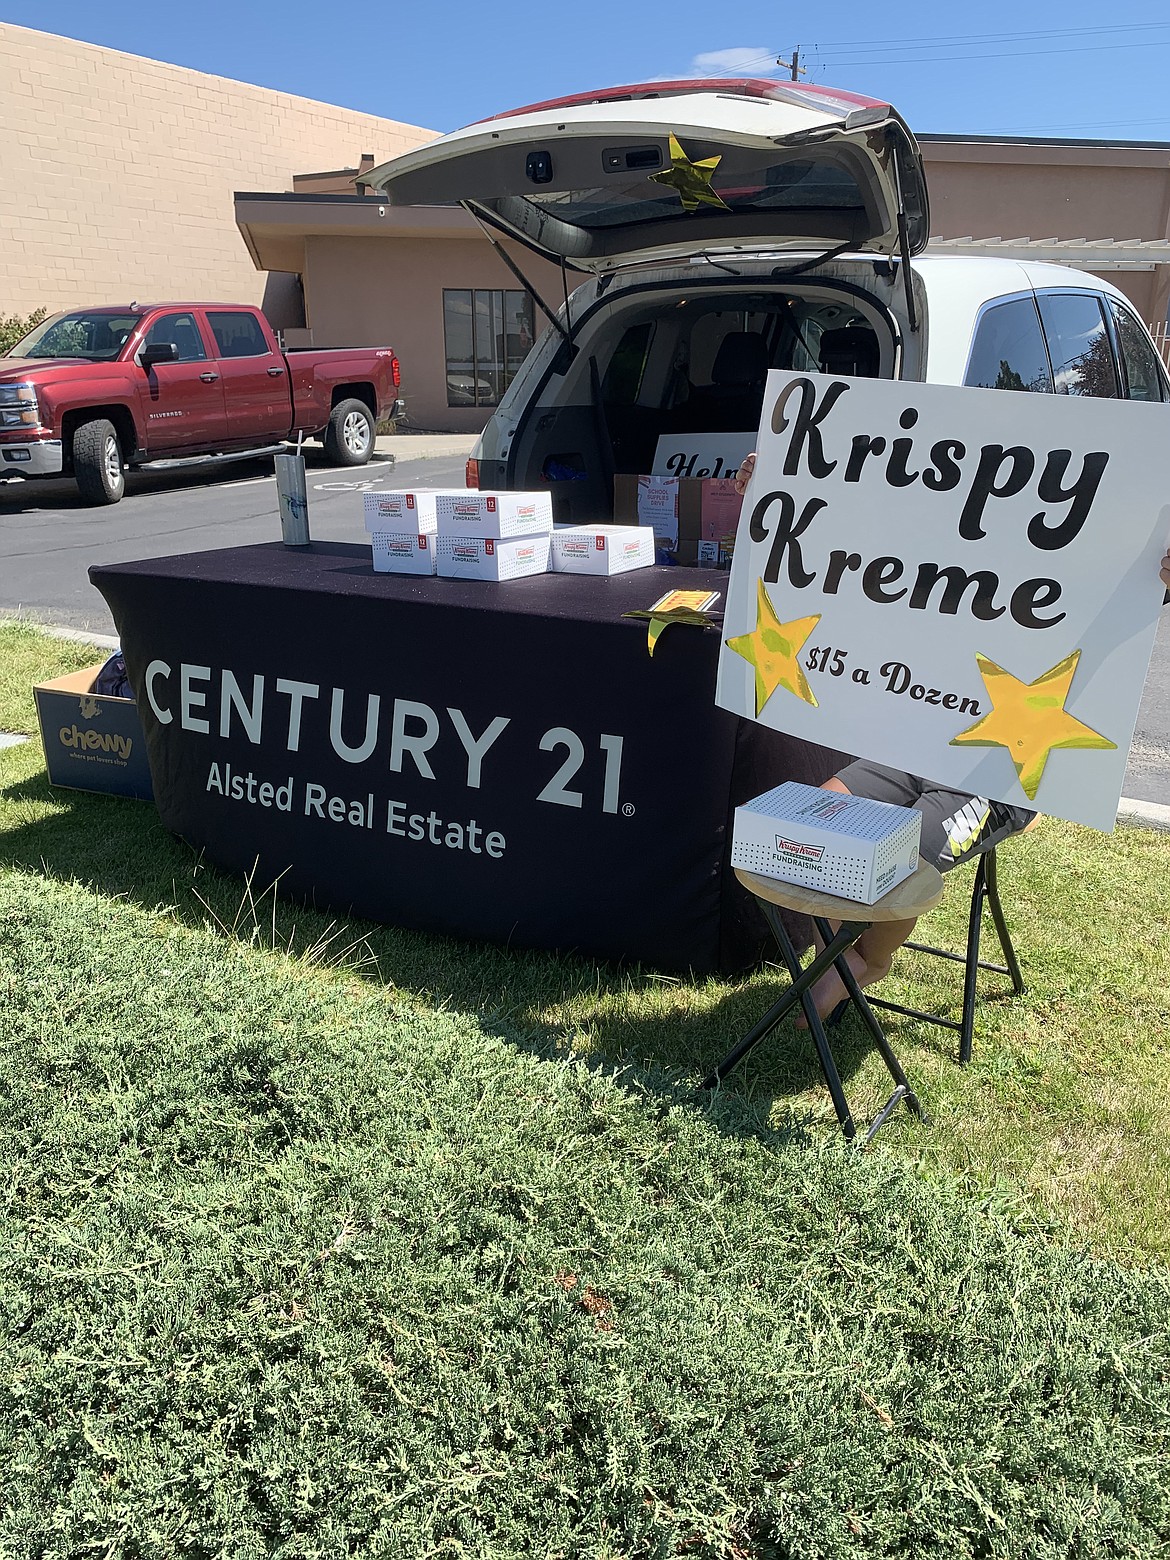 Real estate agent Anna Lucero’s Krispy Kreme sale outside the CENTURY 21 Alsted Real Estate office in Moses Lake, as well as another sale at K-9 Kuts in Ephrata, brought in $800 in two days. The money went for school supplies in Moses Lake, Wilson Creek, Ephrata and Quincy.